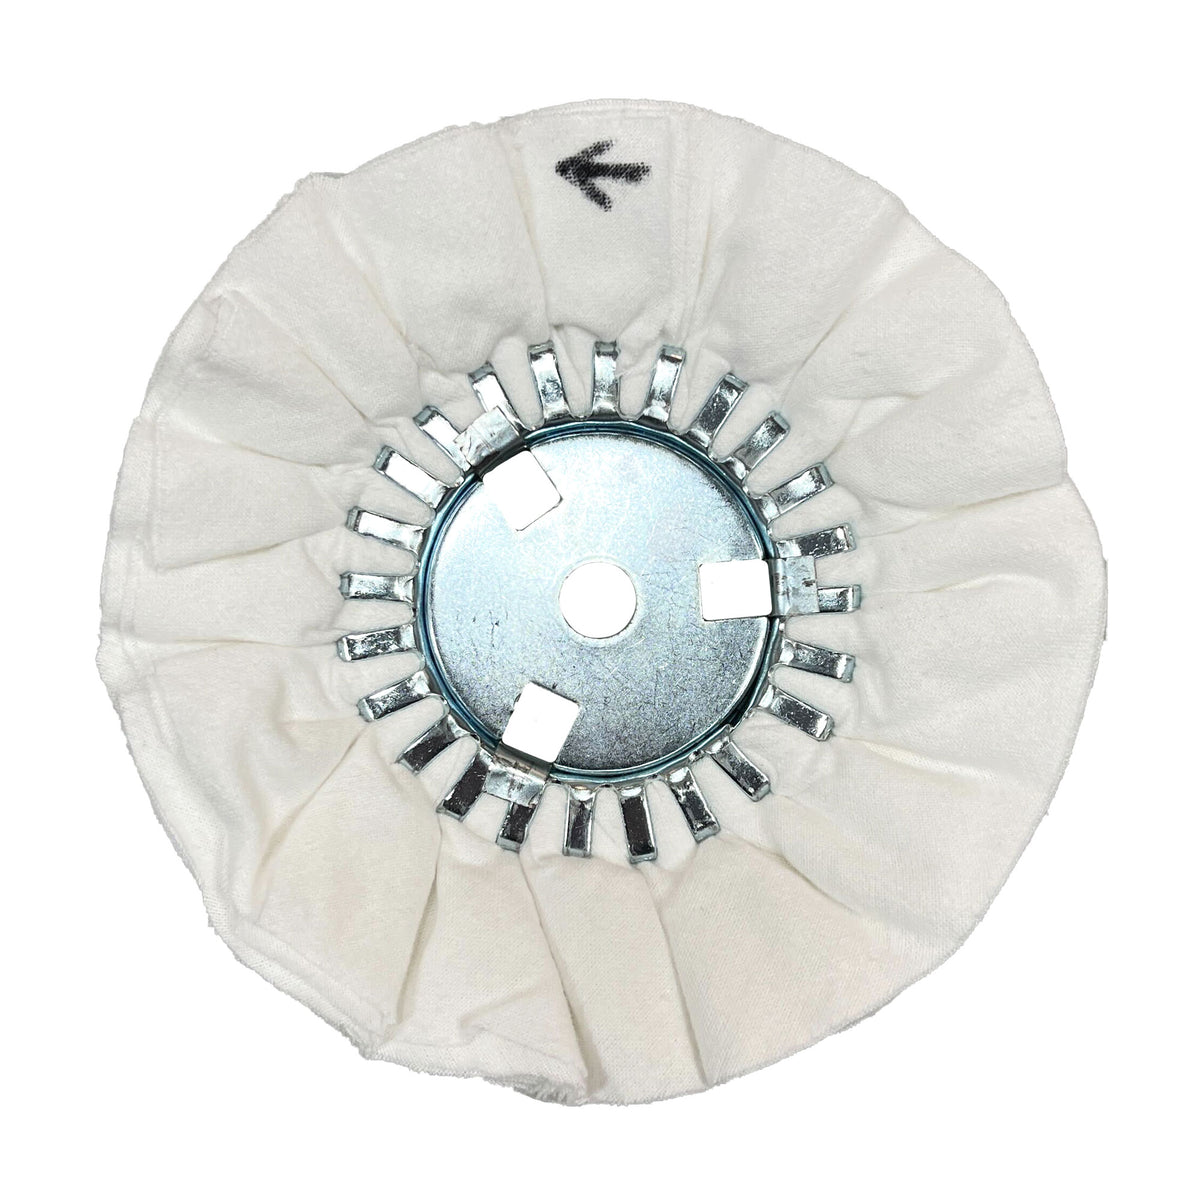 Renegade Products USA Domet Flannel Airway Buffing Wheel with Center Plate - Premium Buffing Tool for Superior Polishing Results